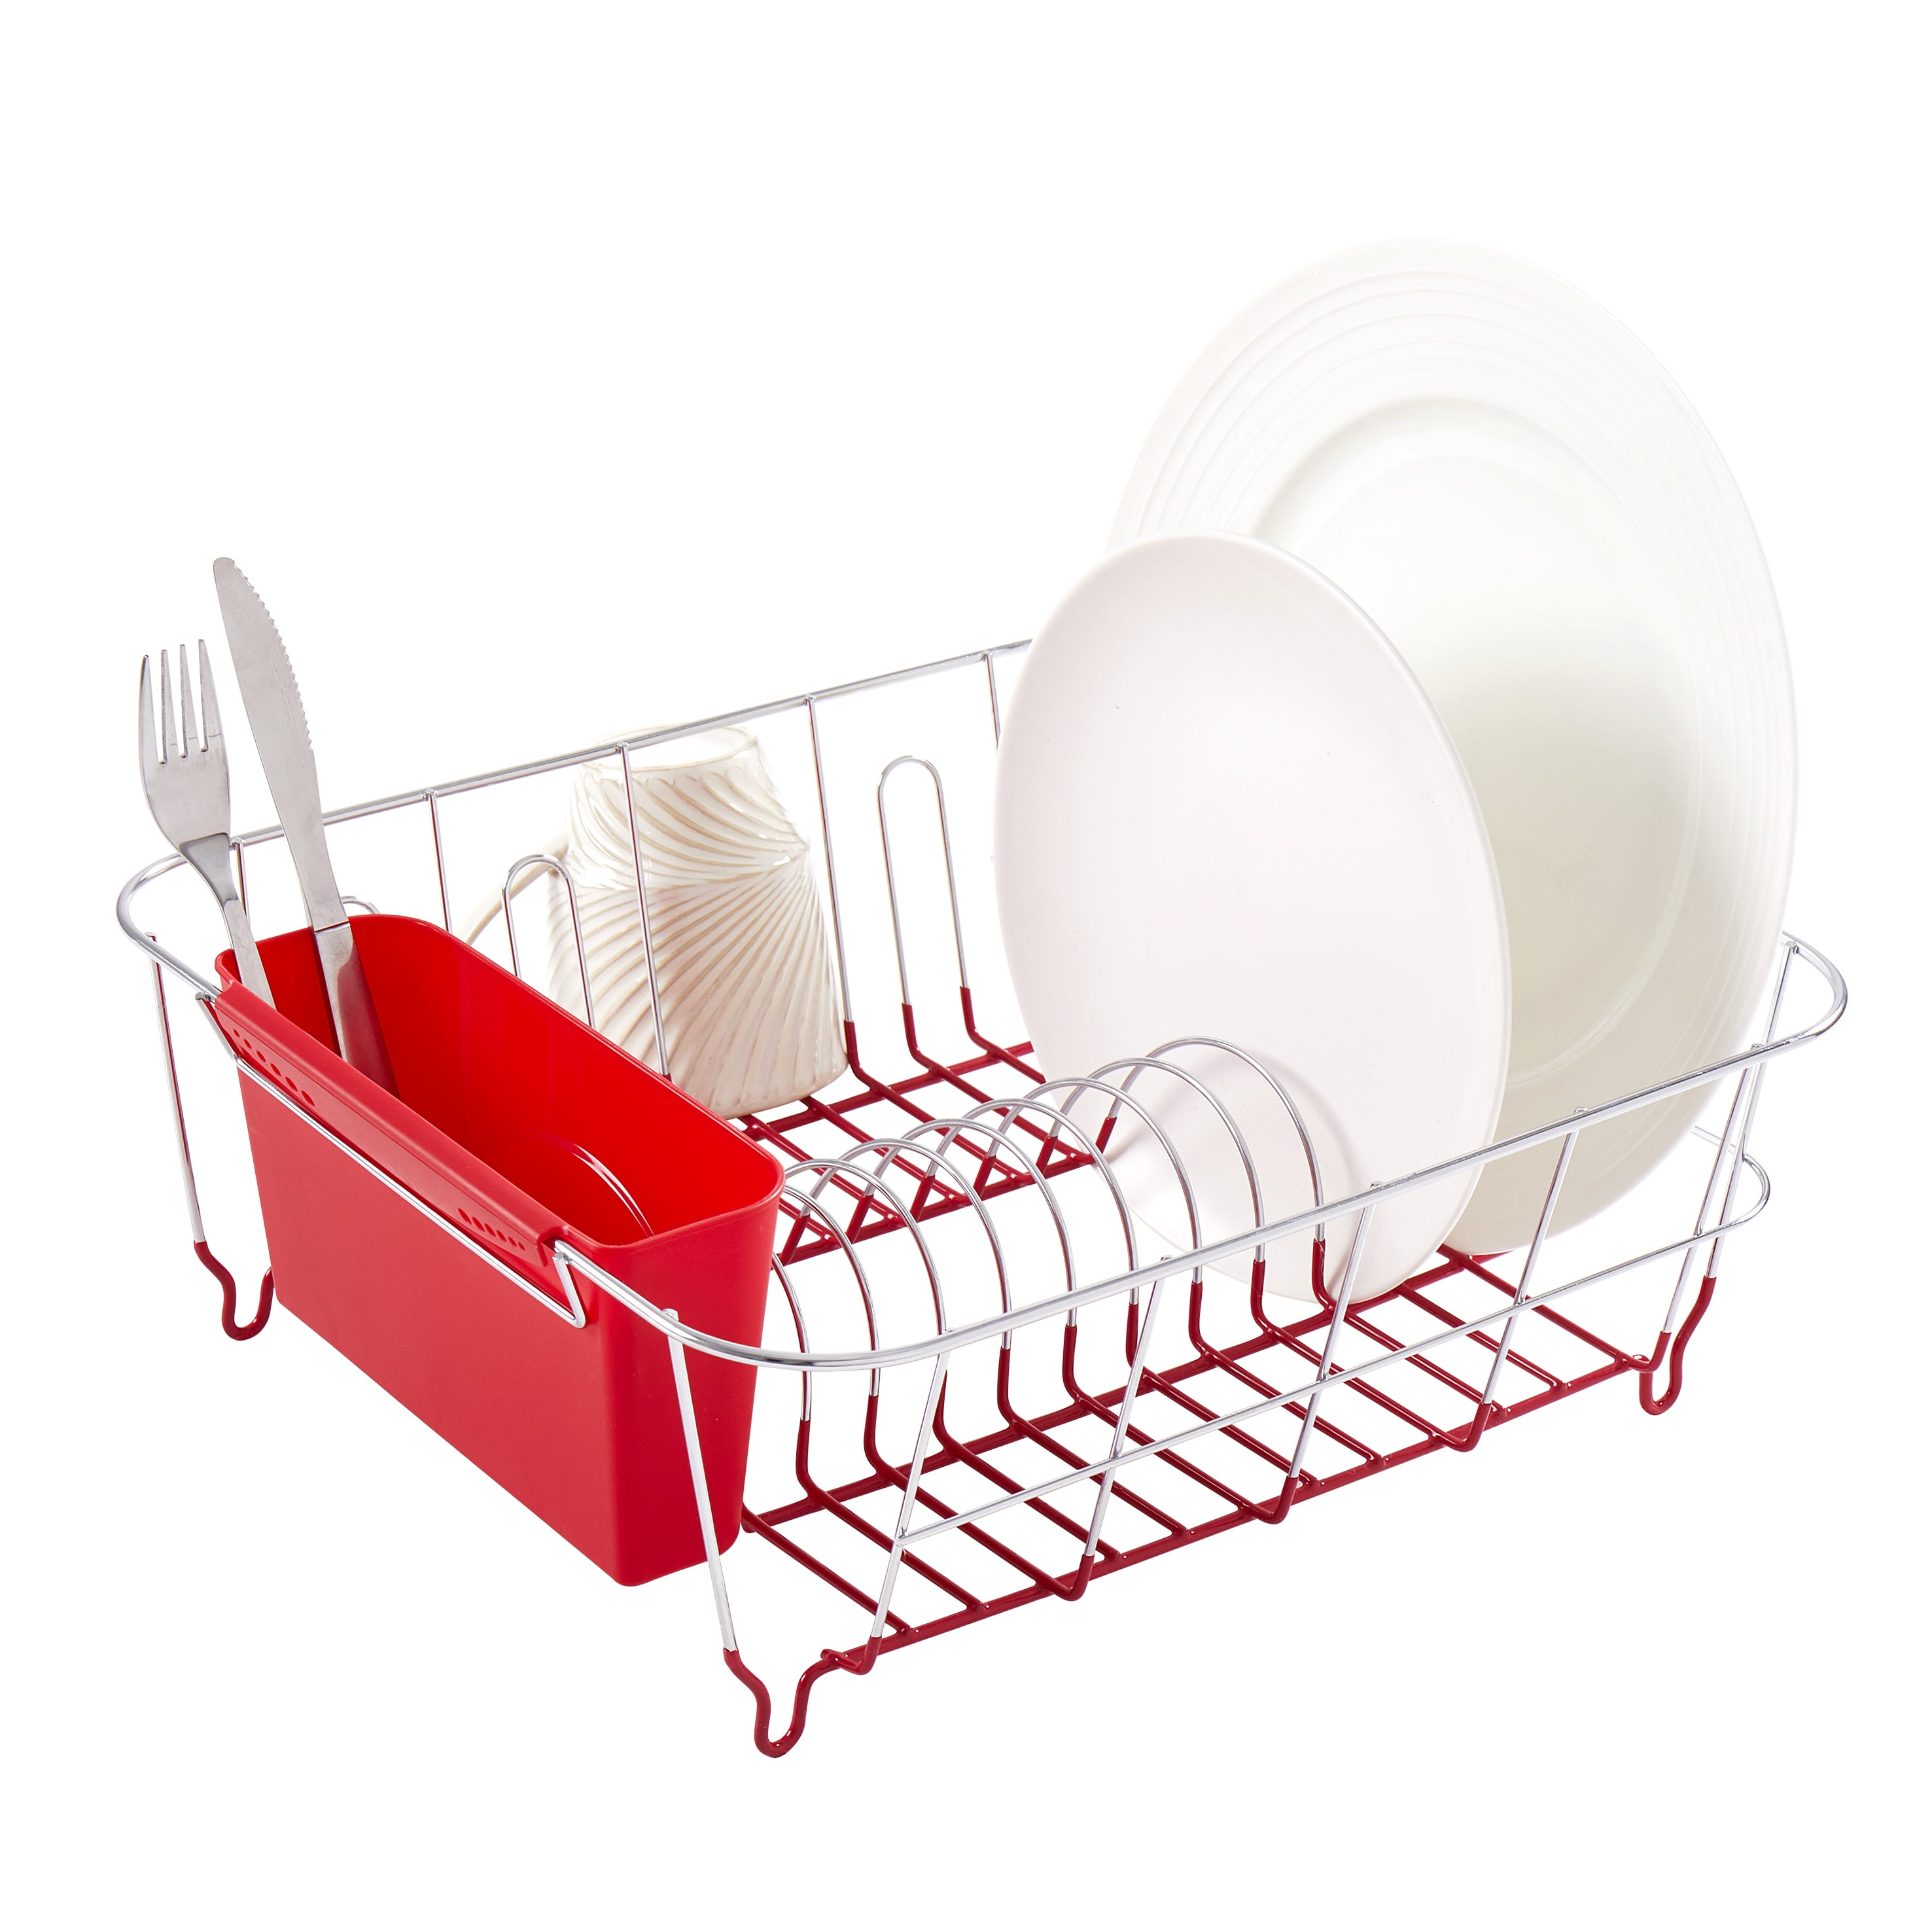 Sweet Home Collection Chrome Plated Steel Small 2 Piece Dish Drainer Red